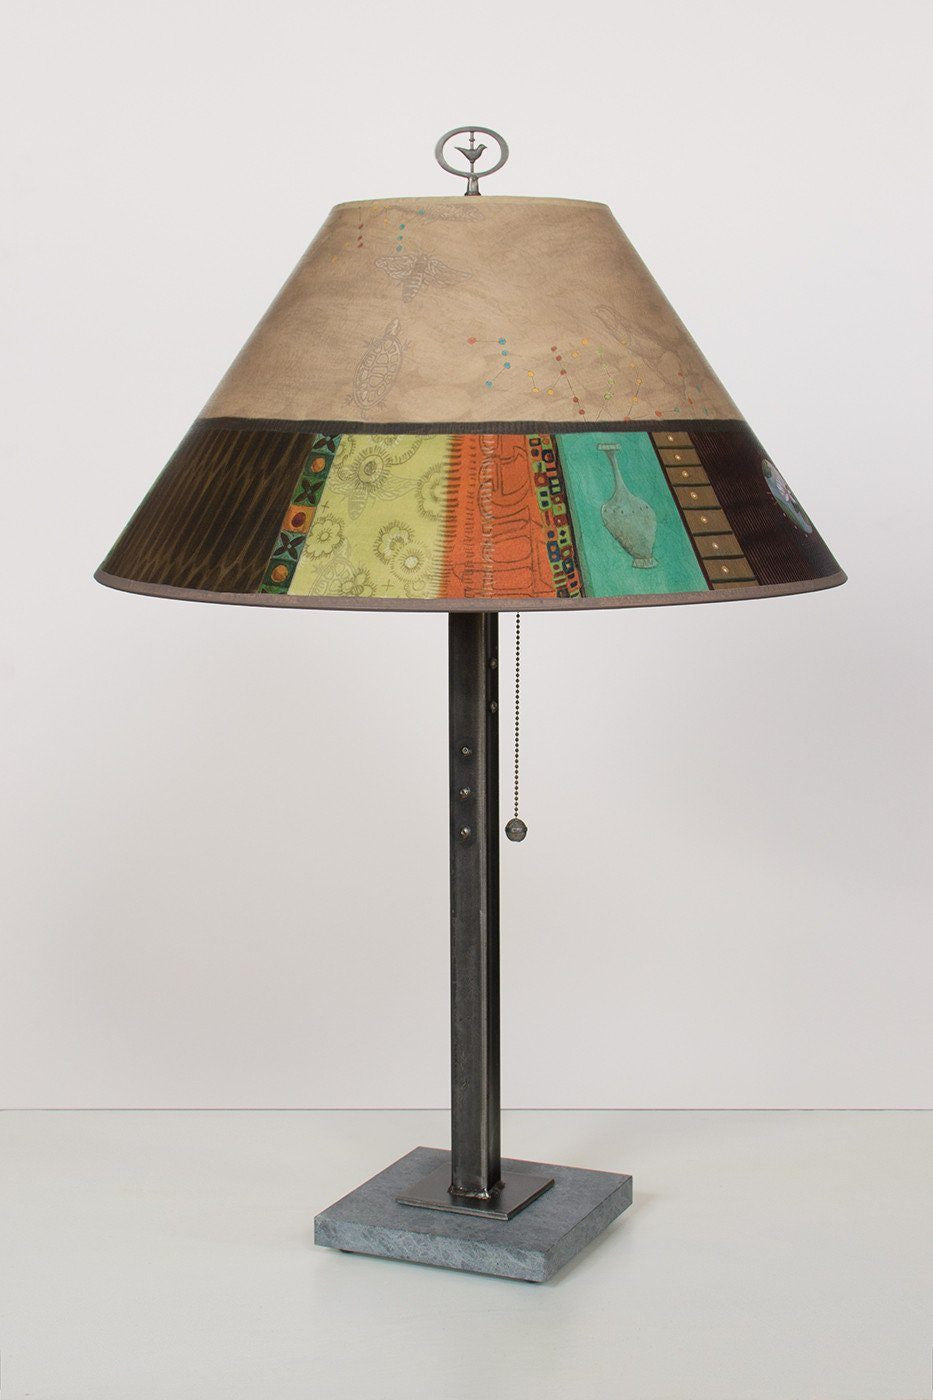 Janna Ugone & Co Table Lamps Steel Table Lamp with Large Conical Shade in Linen Match